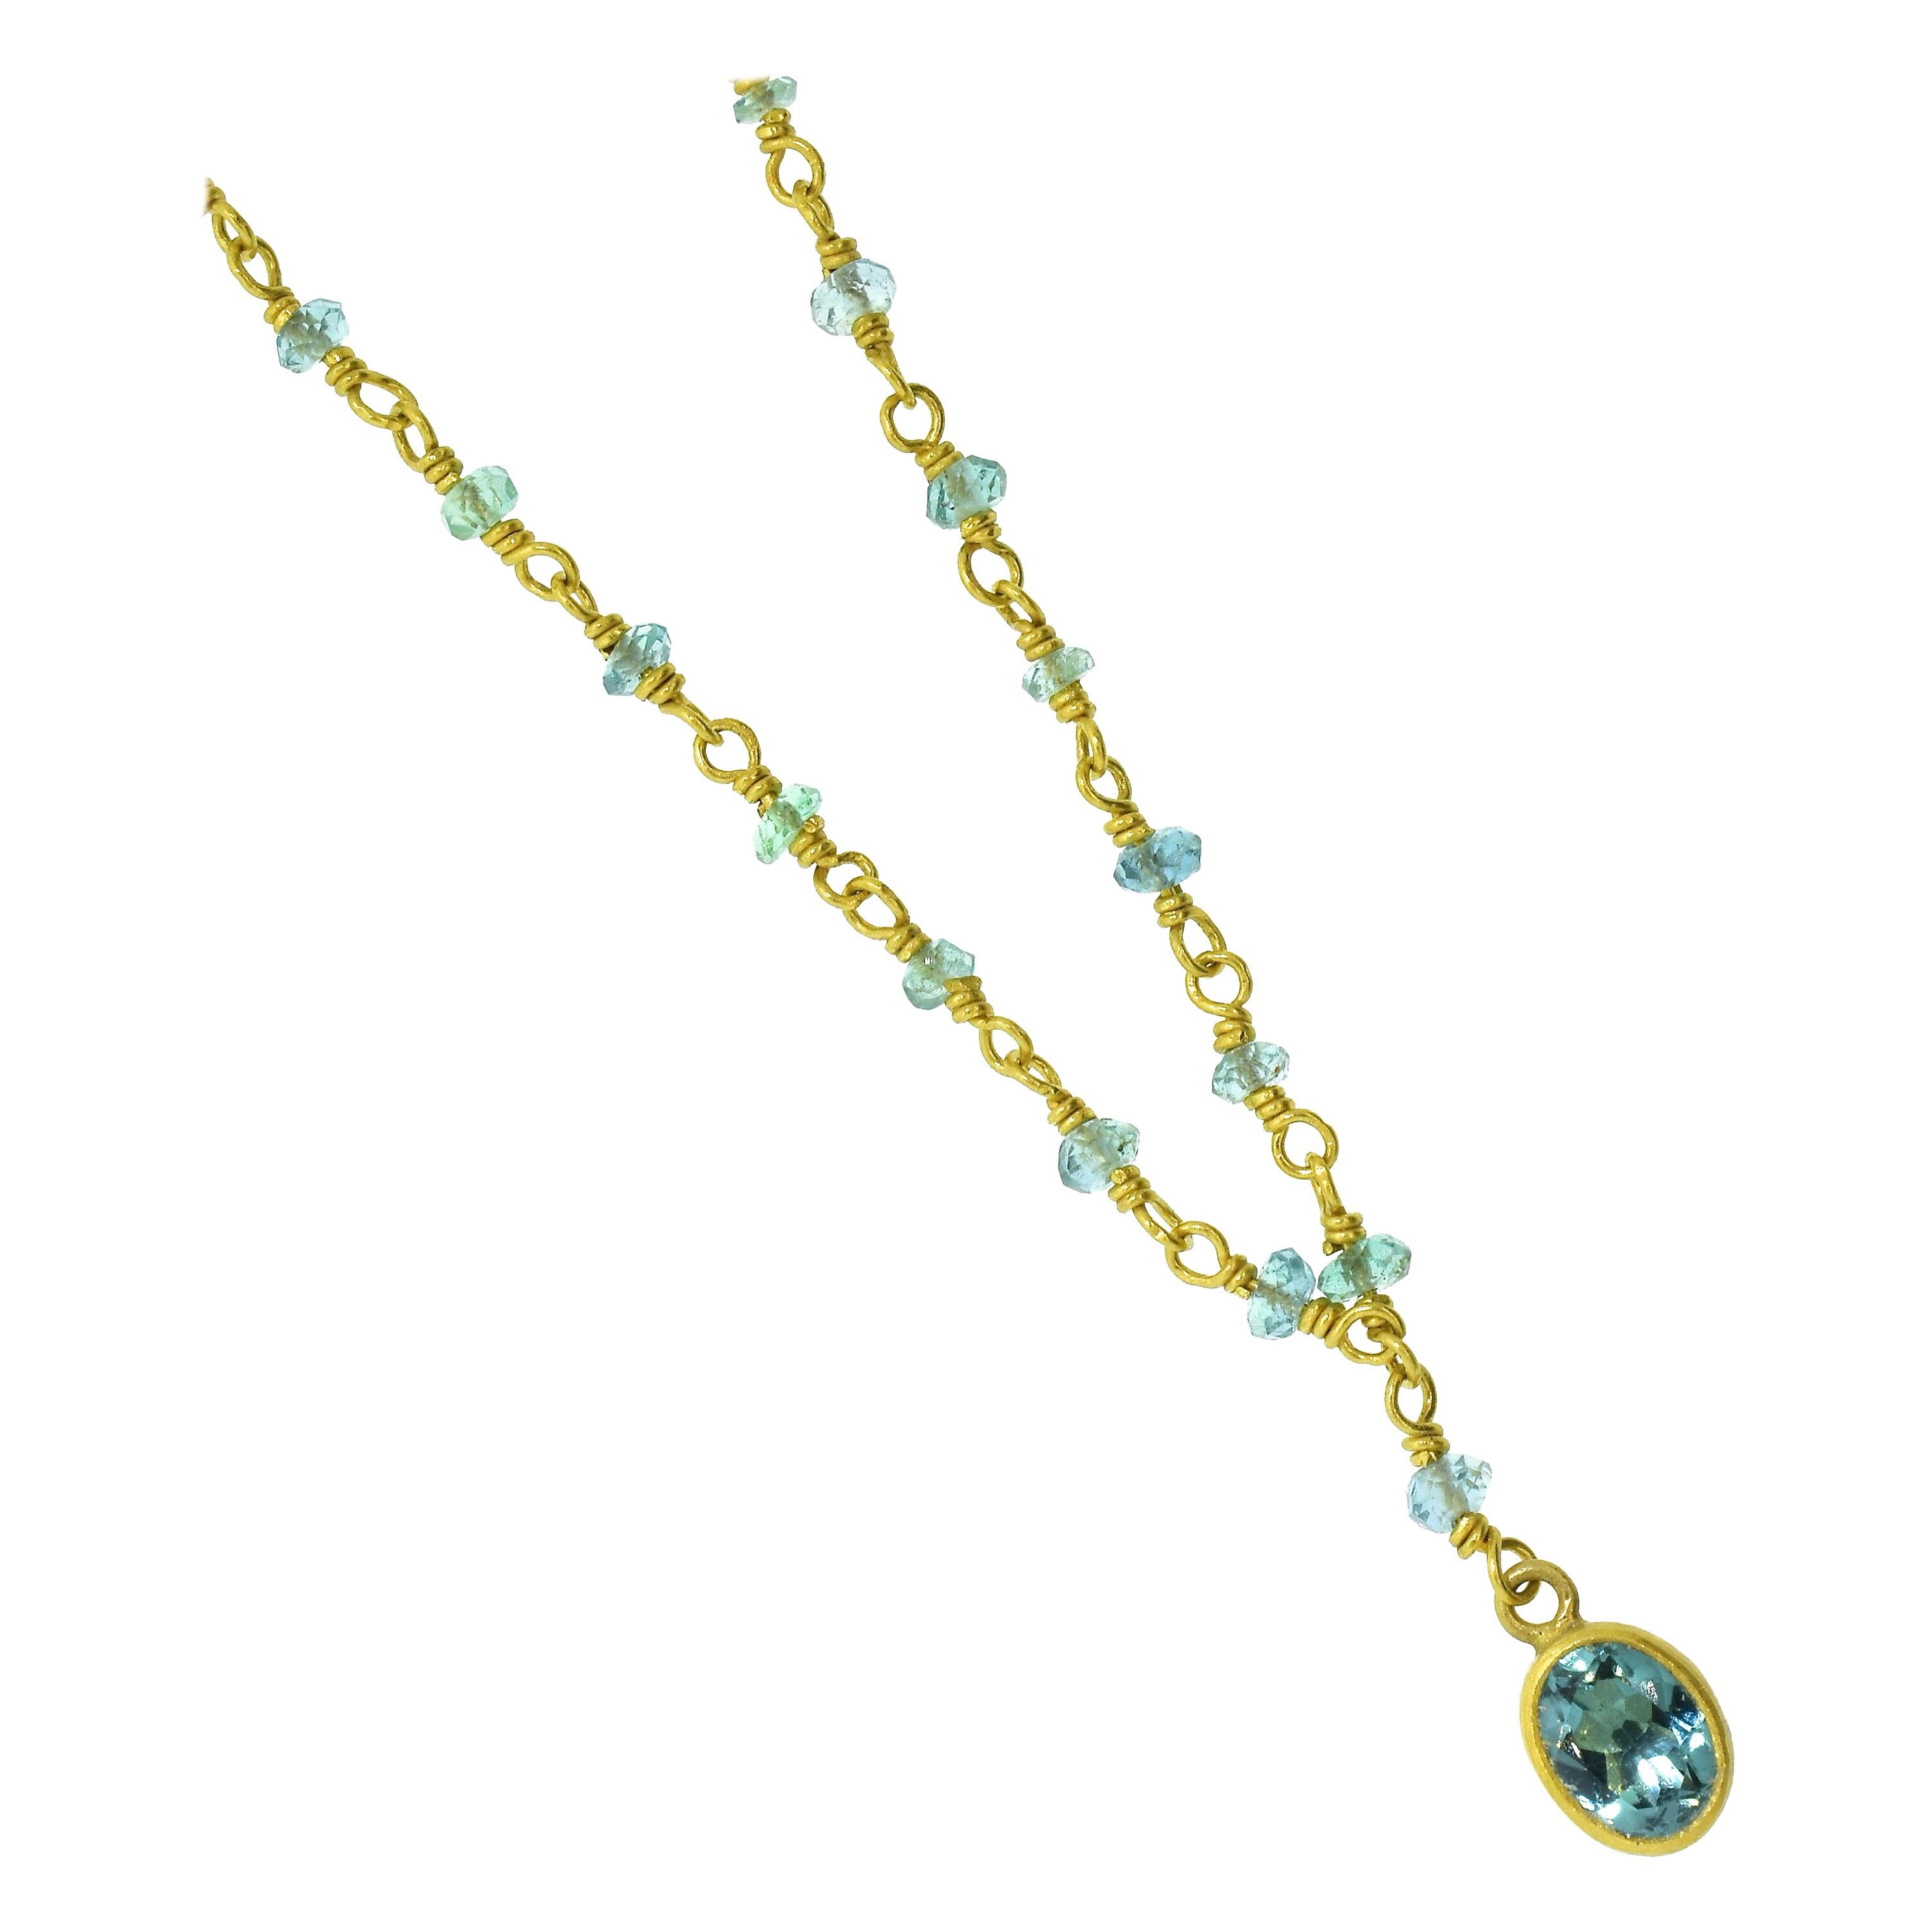 Aquamarine bezel set in 22K gold is suspended on a matching green/blue aquamarine and 14K yellow gold necklace which is 16.5 inches in length.  Contemporary in design, there are 66 natural aquamarine faceted beads interspersed in the gold chain. 